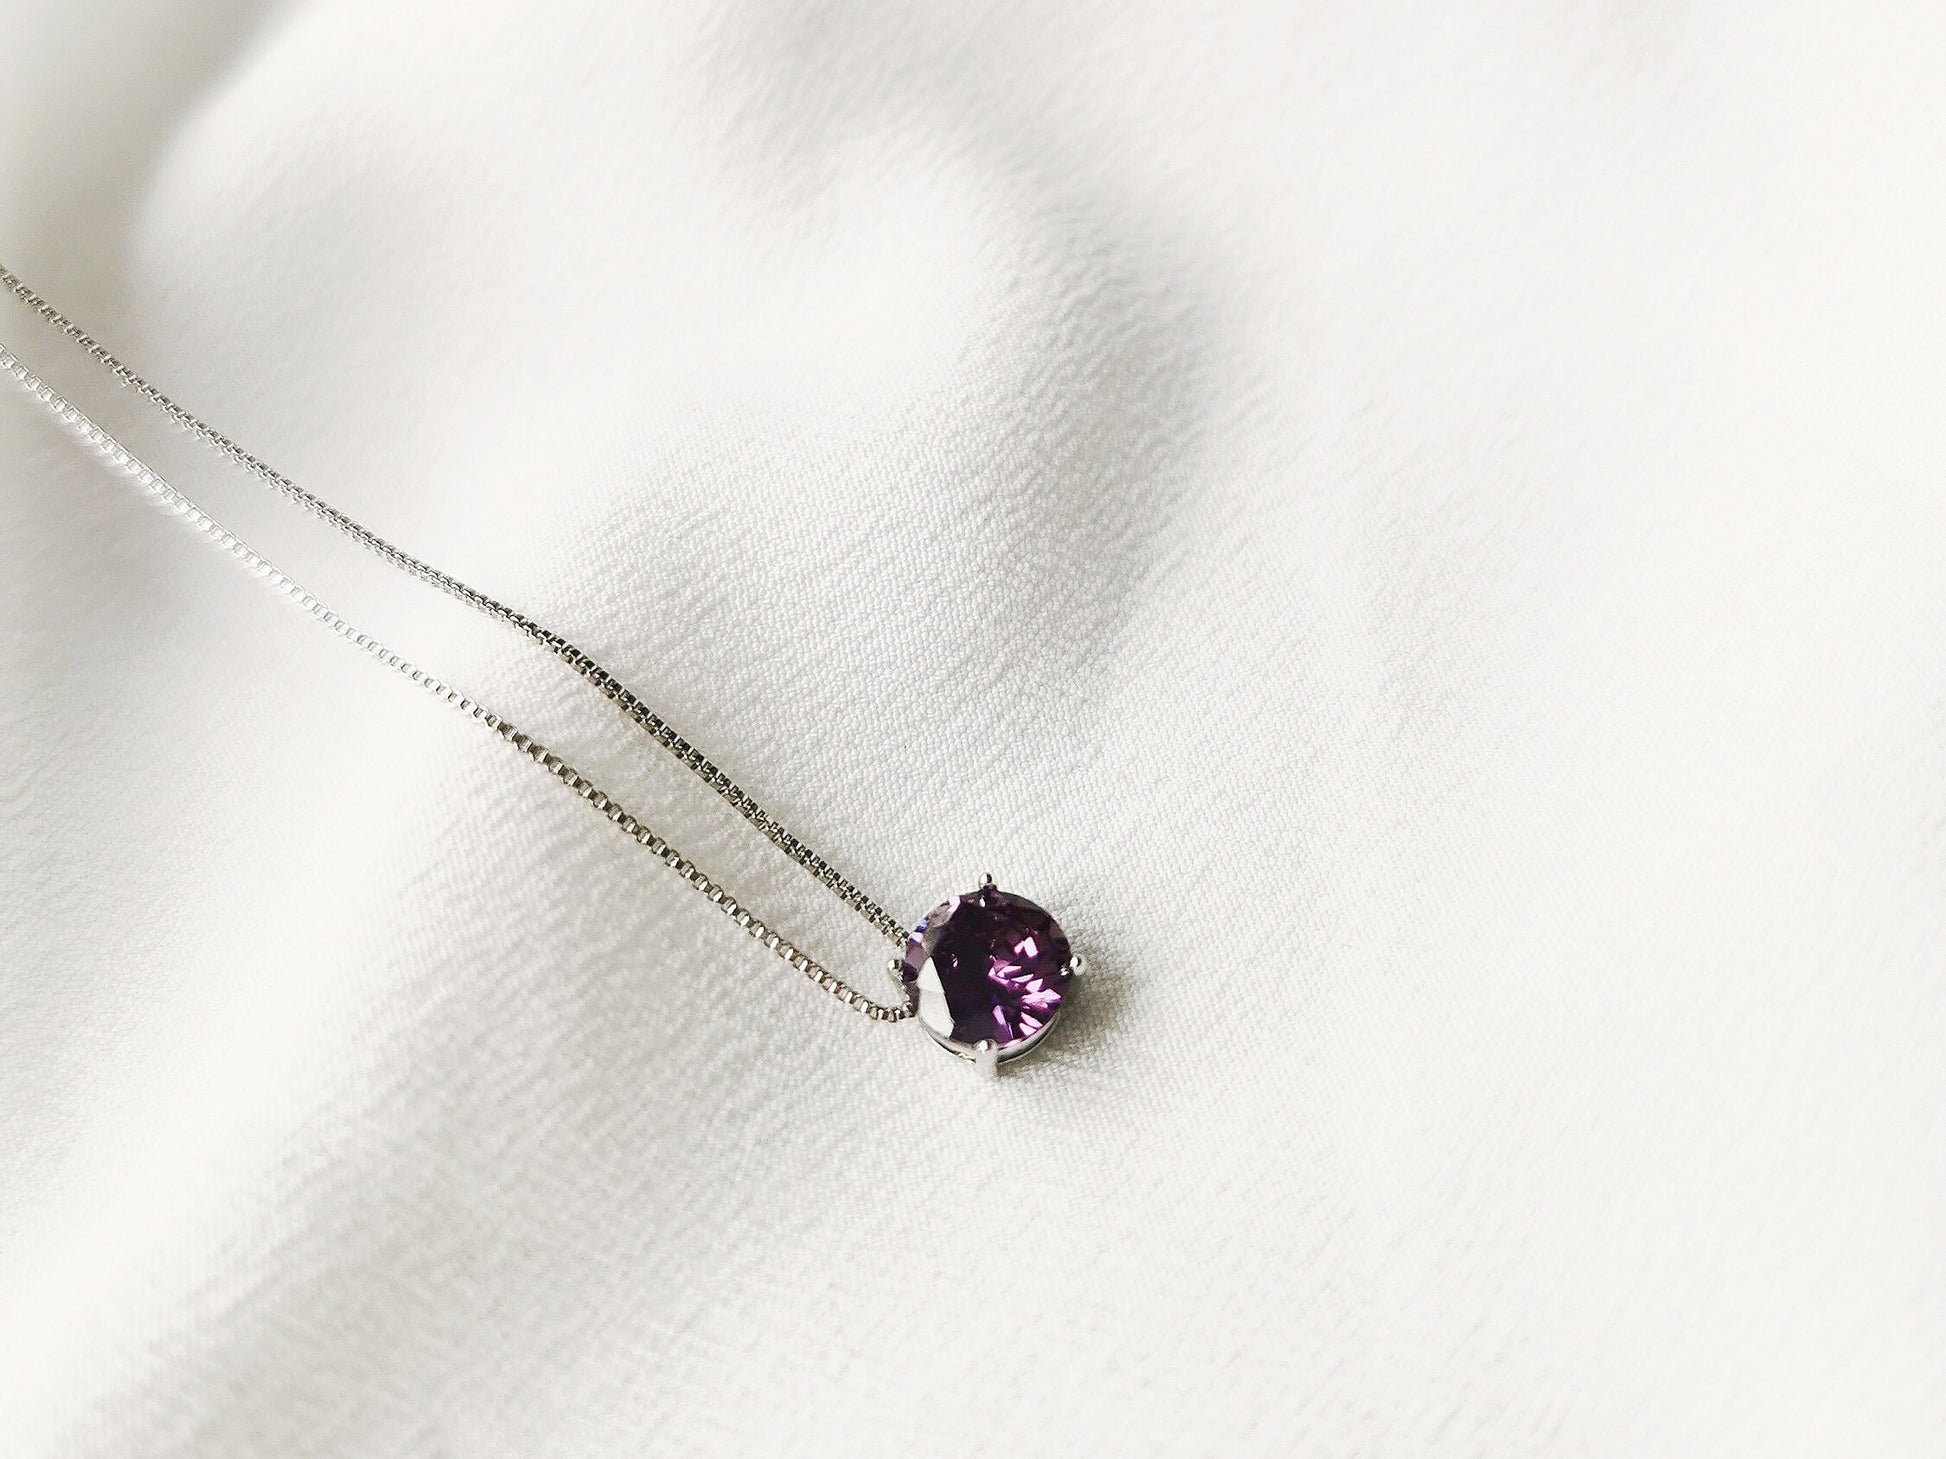 February Birthstone Necklace, White Gold Plated, Amethyst Crystal Pendant Handcrafted with Swarovski® Crystals, Christmas Gift For Her